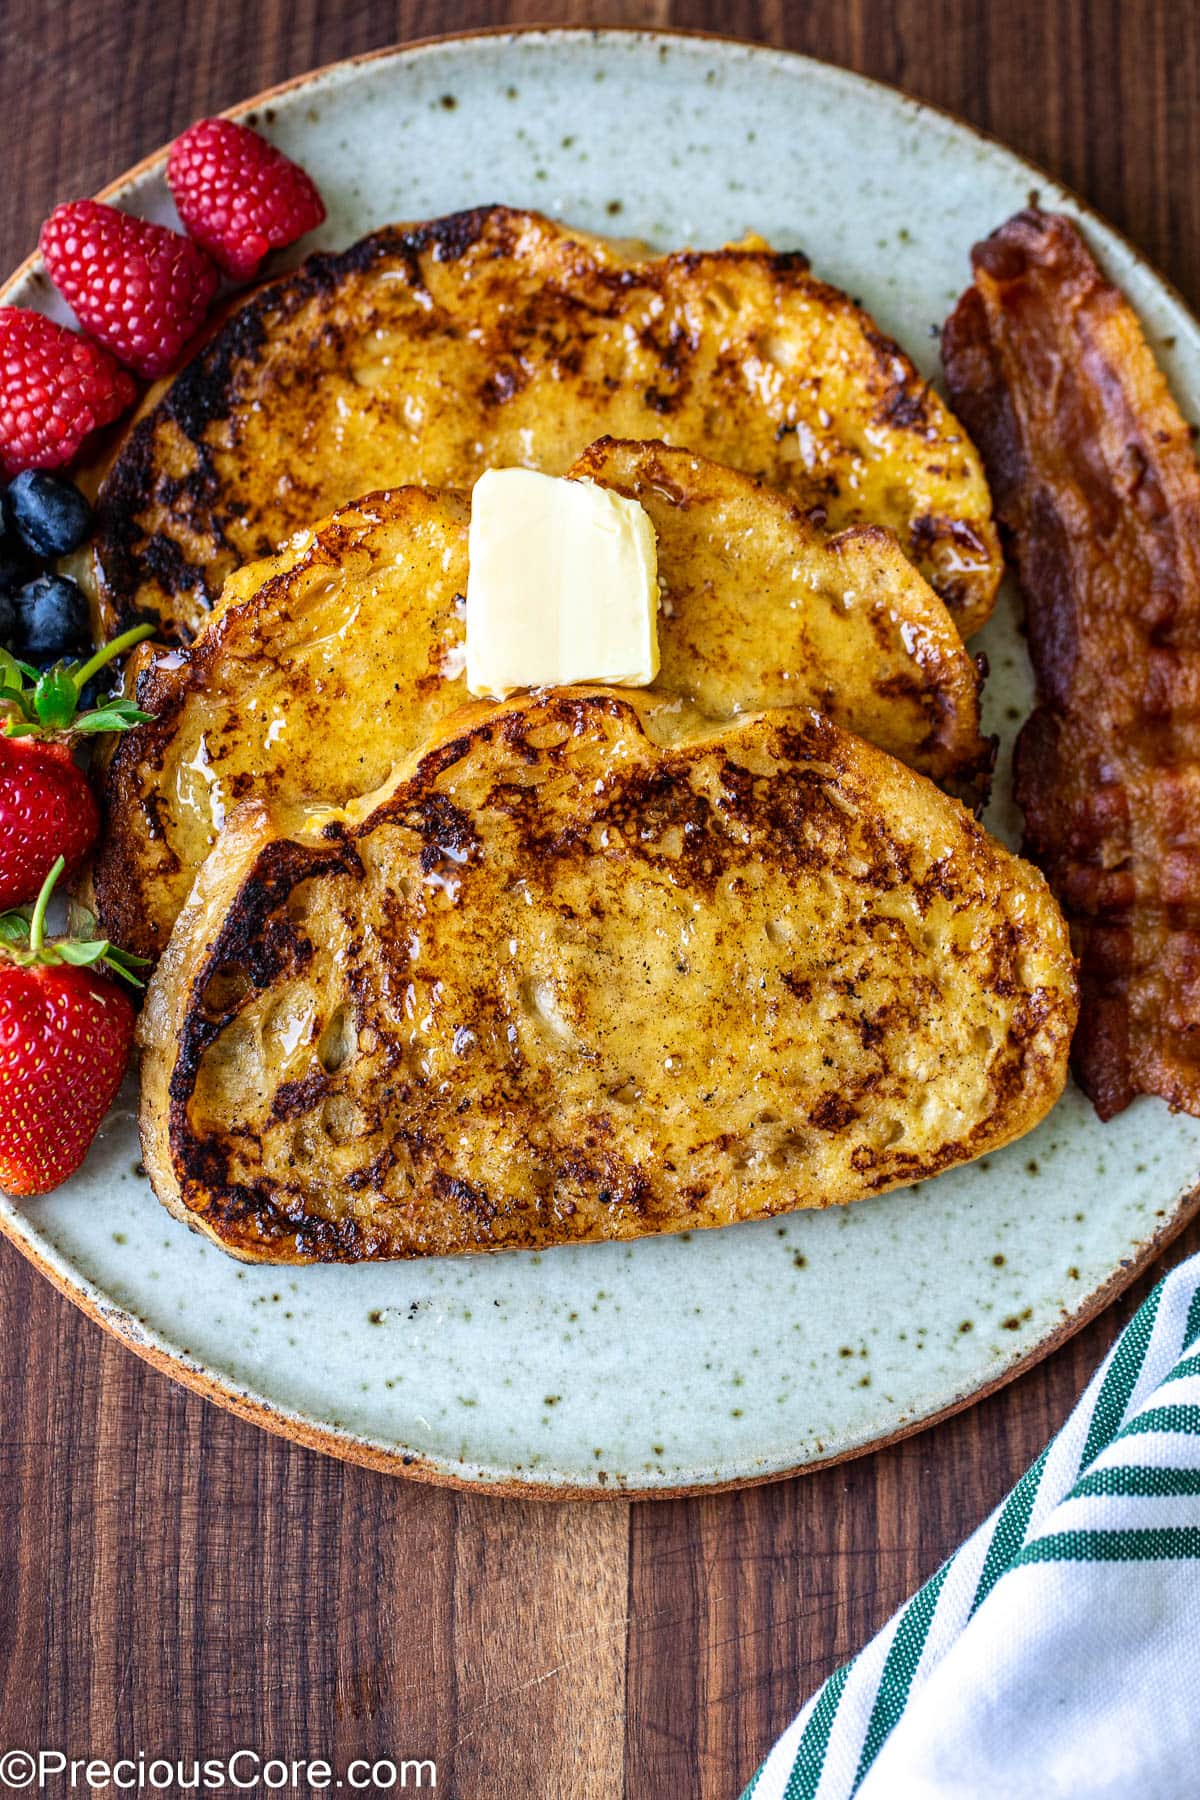 3 slices of sourdough French toast on a plate with fruit and bacon on the side.